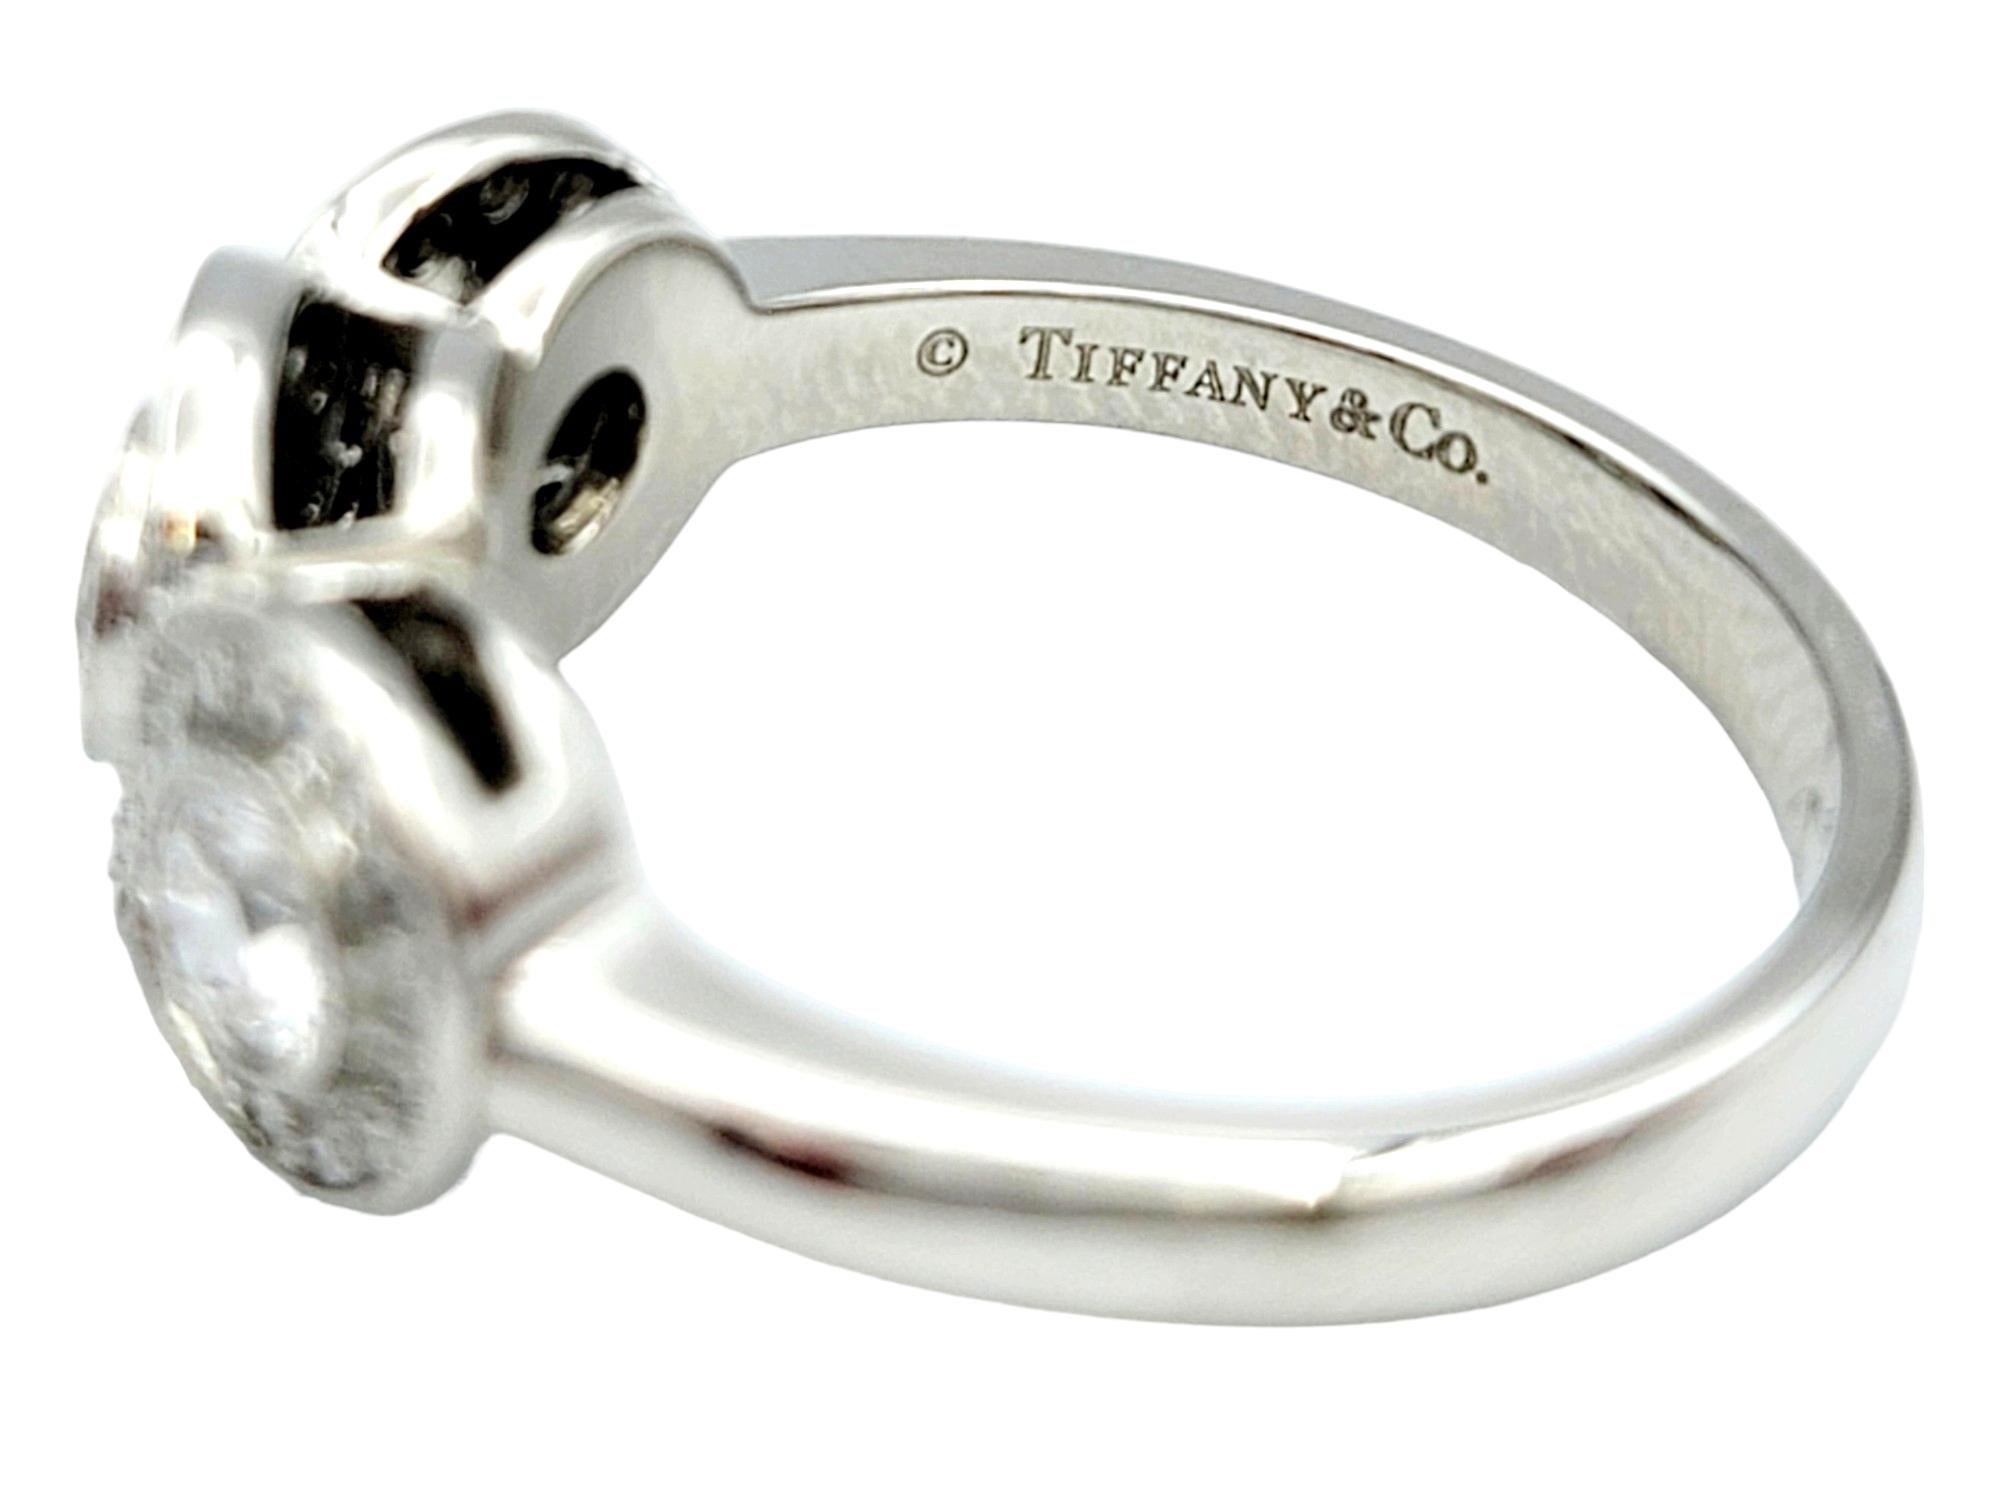 Tiffany & Co. Three Stone Circlet Diamond Halo Ring in Platinum Size 4.75 In Good Condition For Sale In Scottsdale, AZ